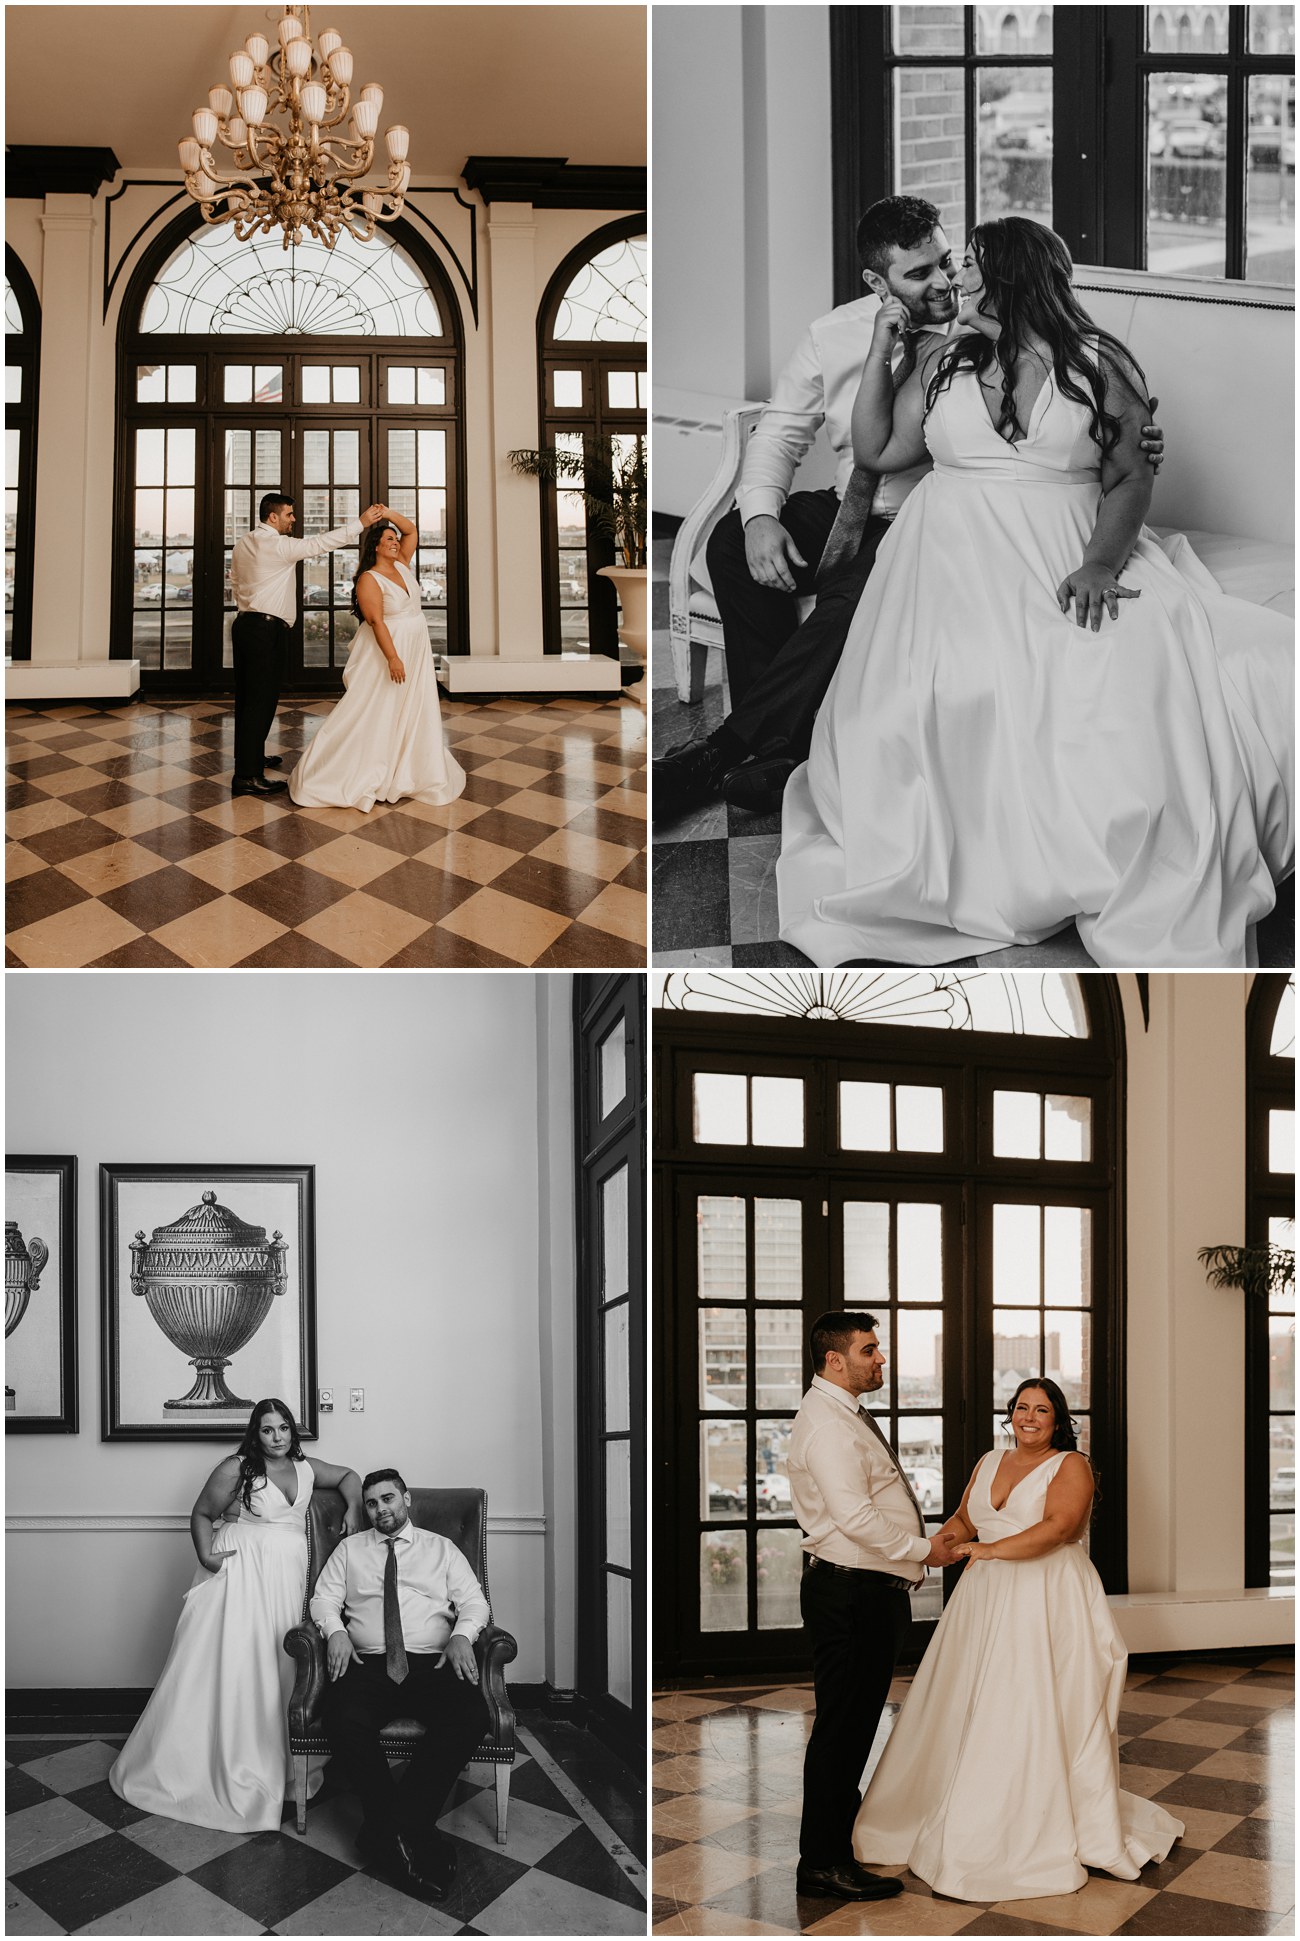 Collage of Bride and Groom portraits inside The Berkeley Hotel in Asbury Park